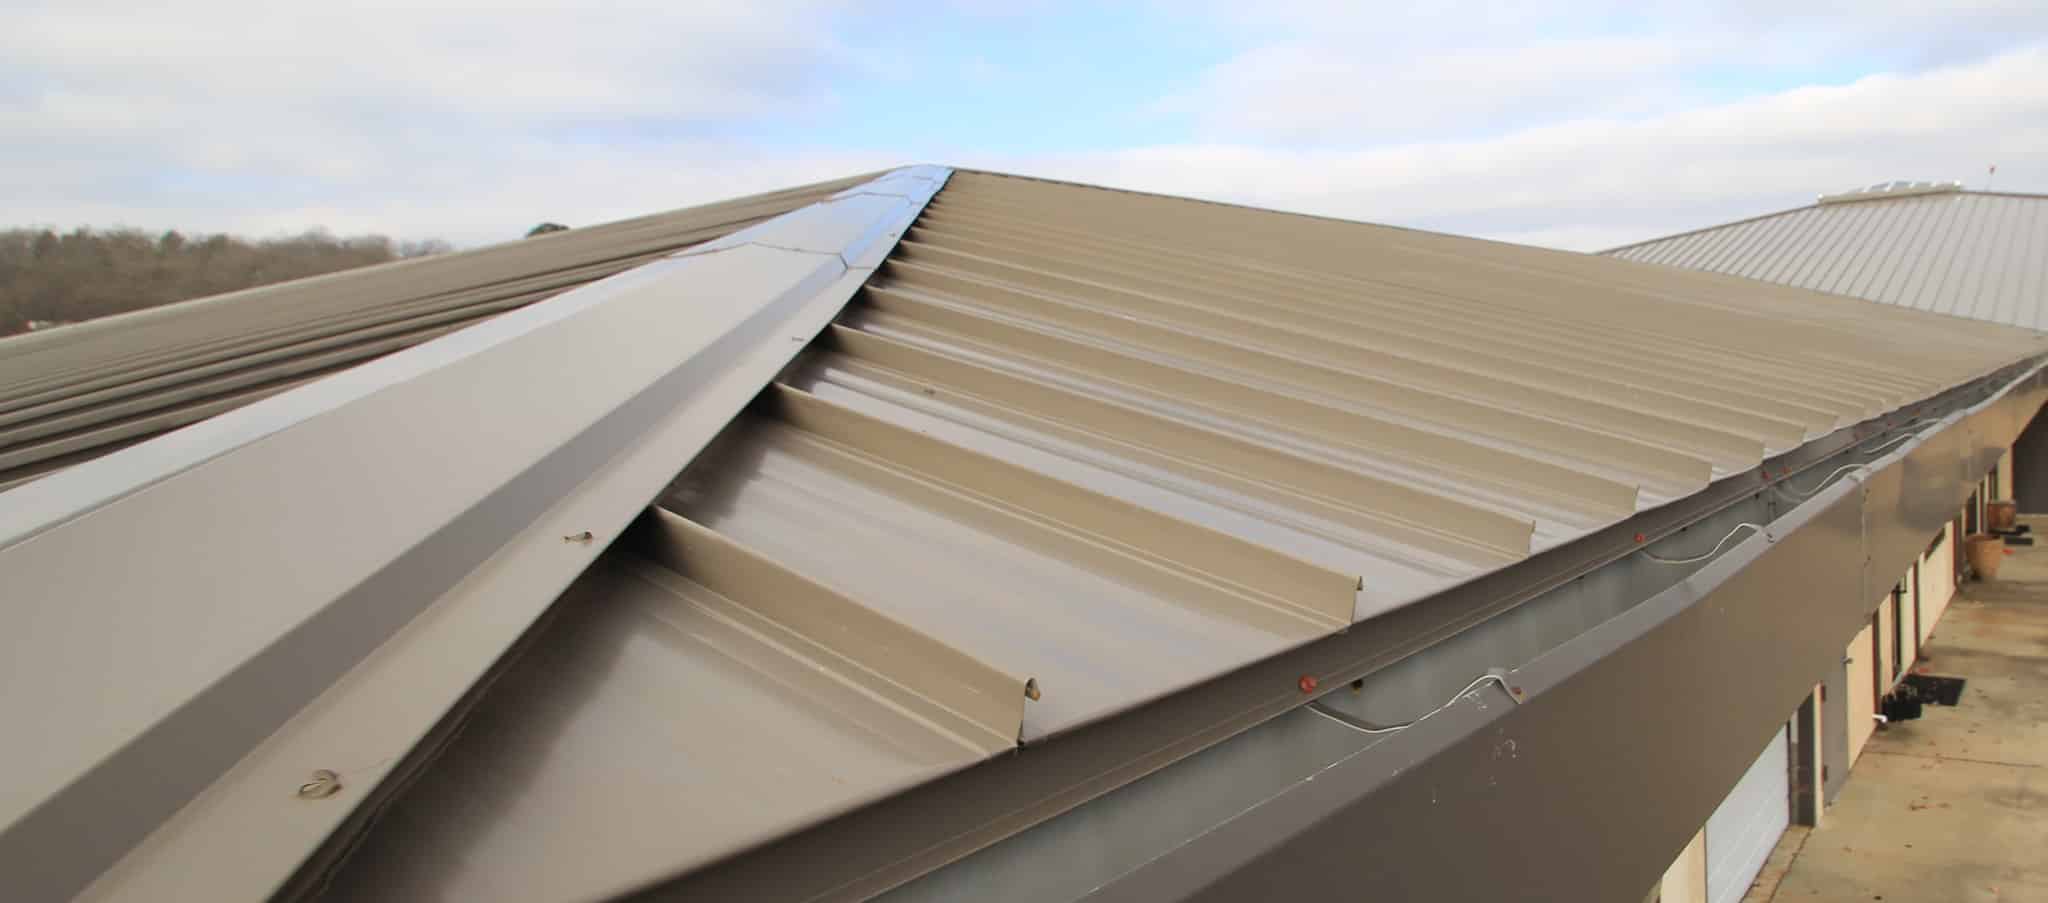 Central Span Metal Roof Terratone